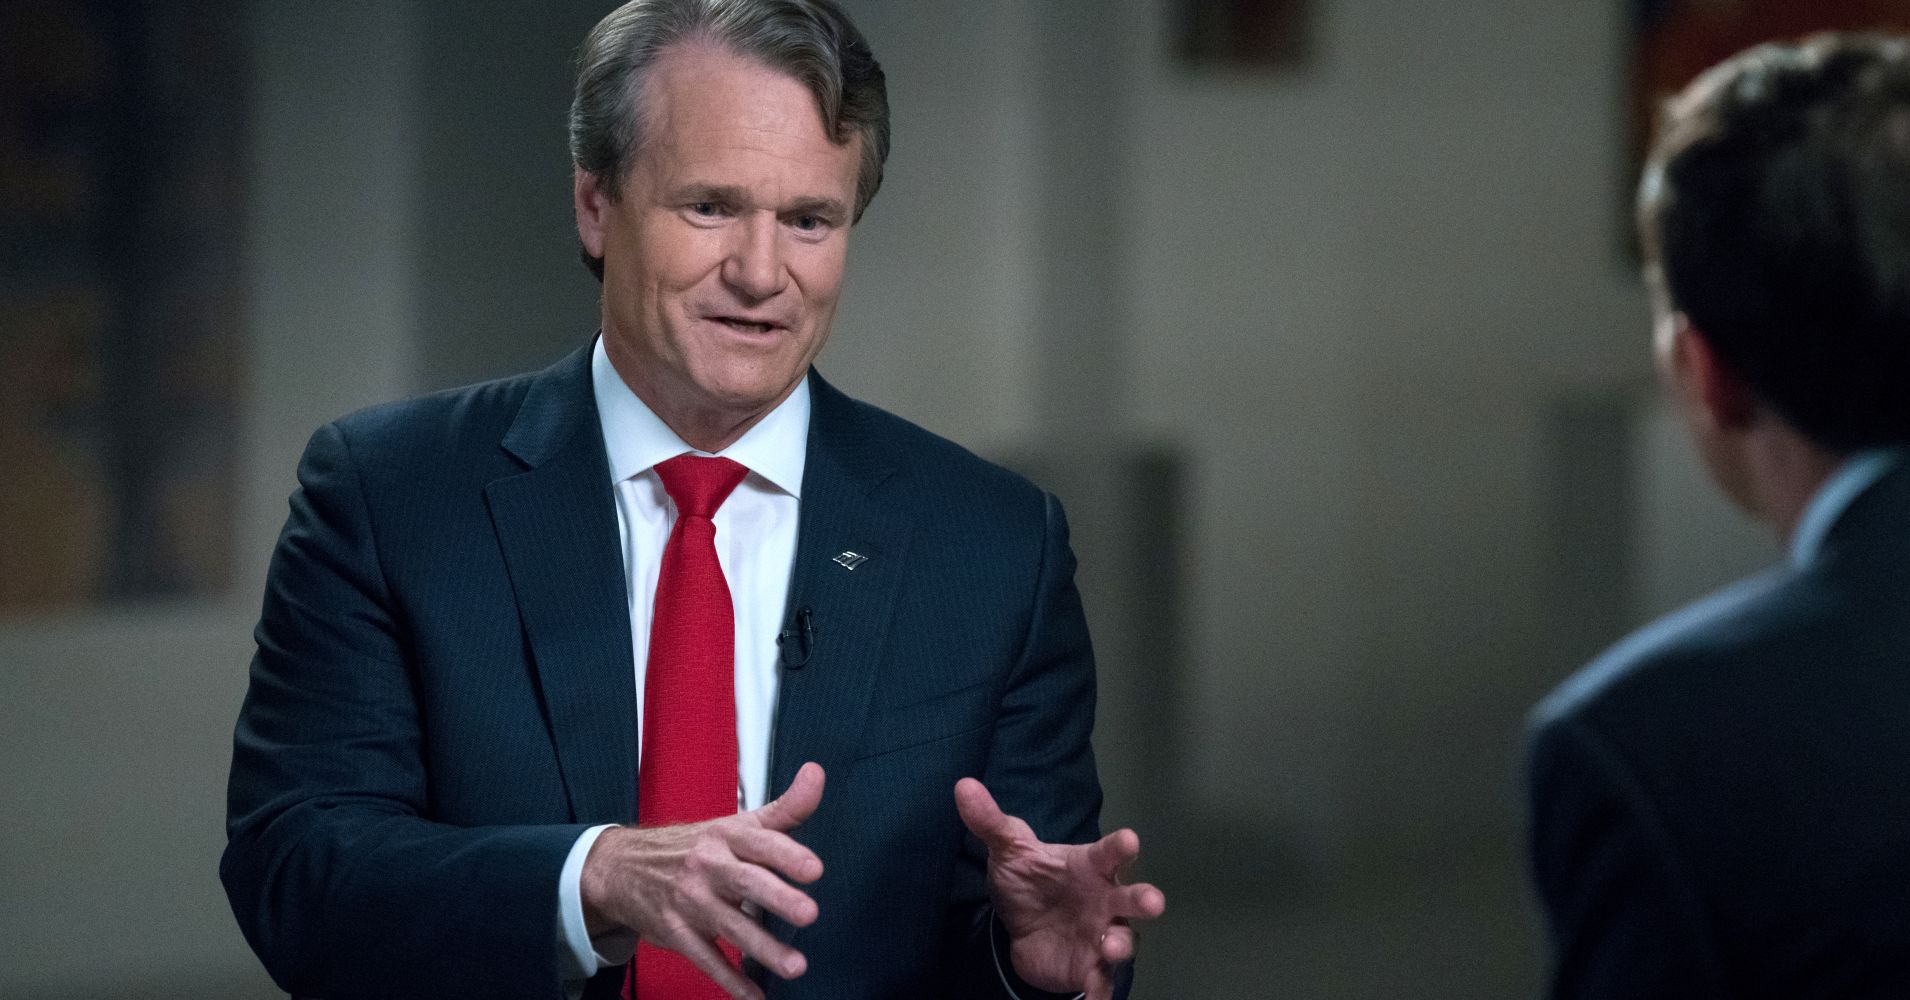 Bank of America will increase its hourly wage